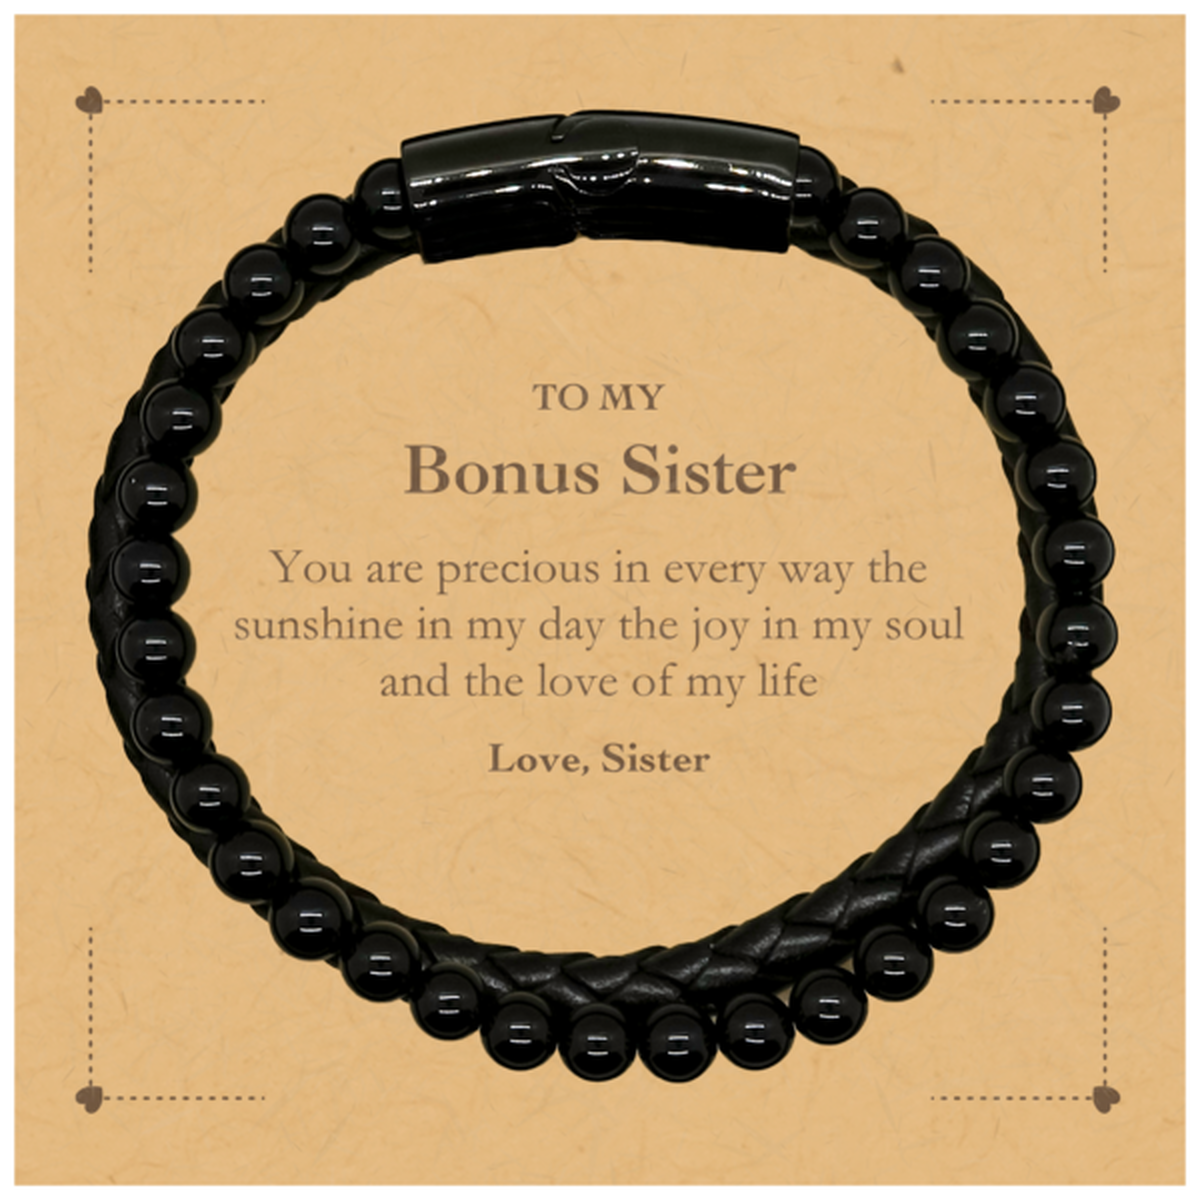 Graduation Gifts for Bonus Sister Stone Leather Bracelets Present from Sister, Christmas Bonus Sister Birthday Gifts Bonus Sister You are precious in every way the sunshine in my day. Love, Sister